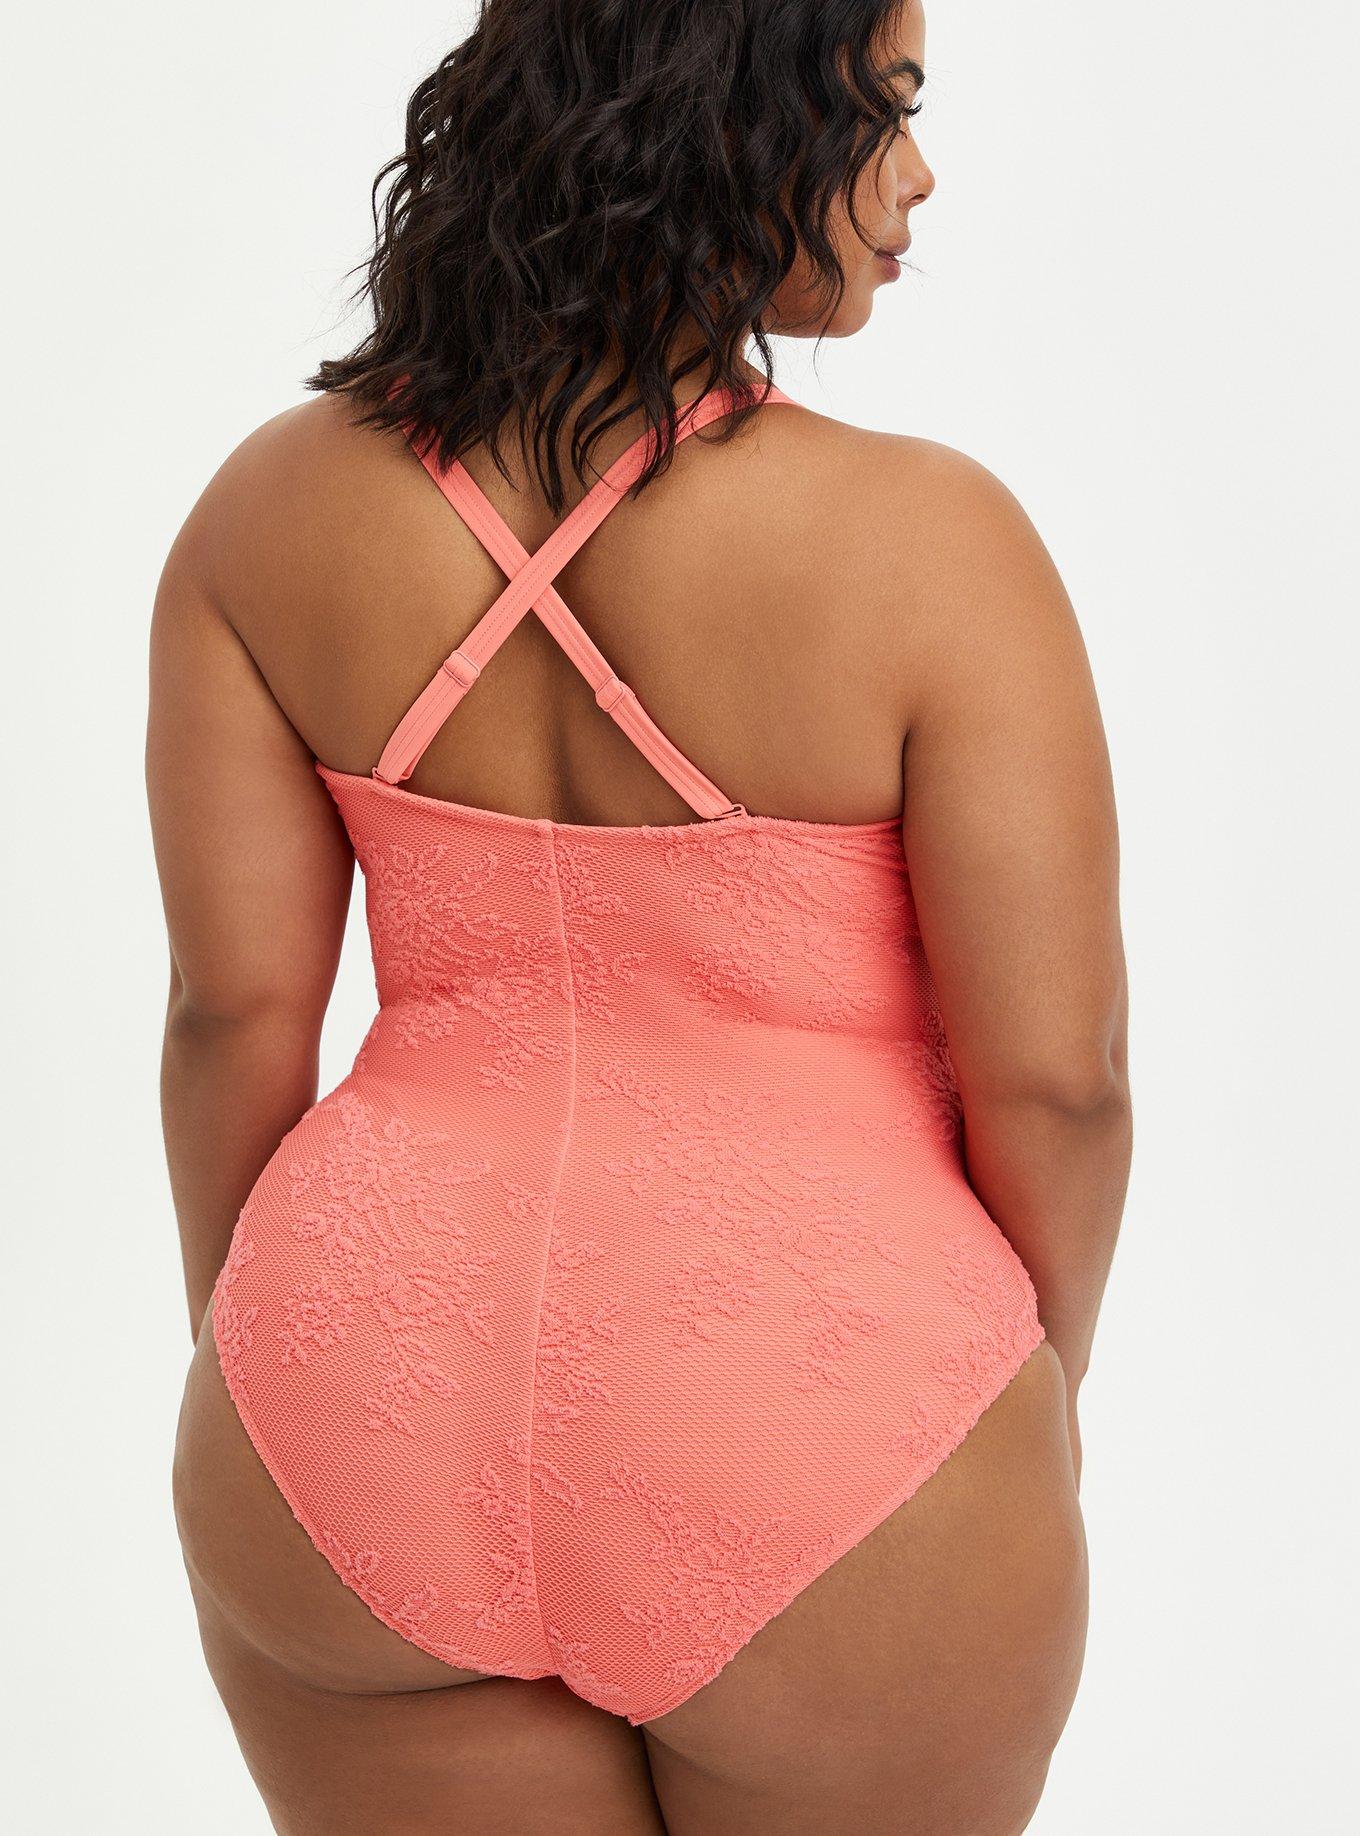 Catherines Plus Size 28W Coral One Piece Swimsuit Bathing Suit Ruffle Front  $119